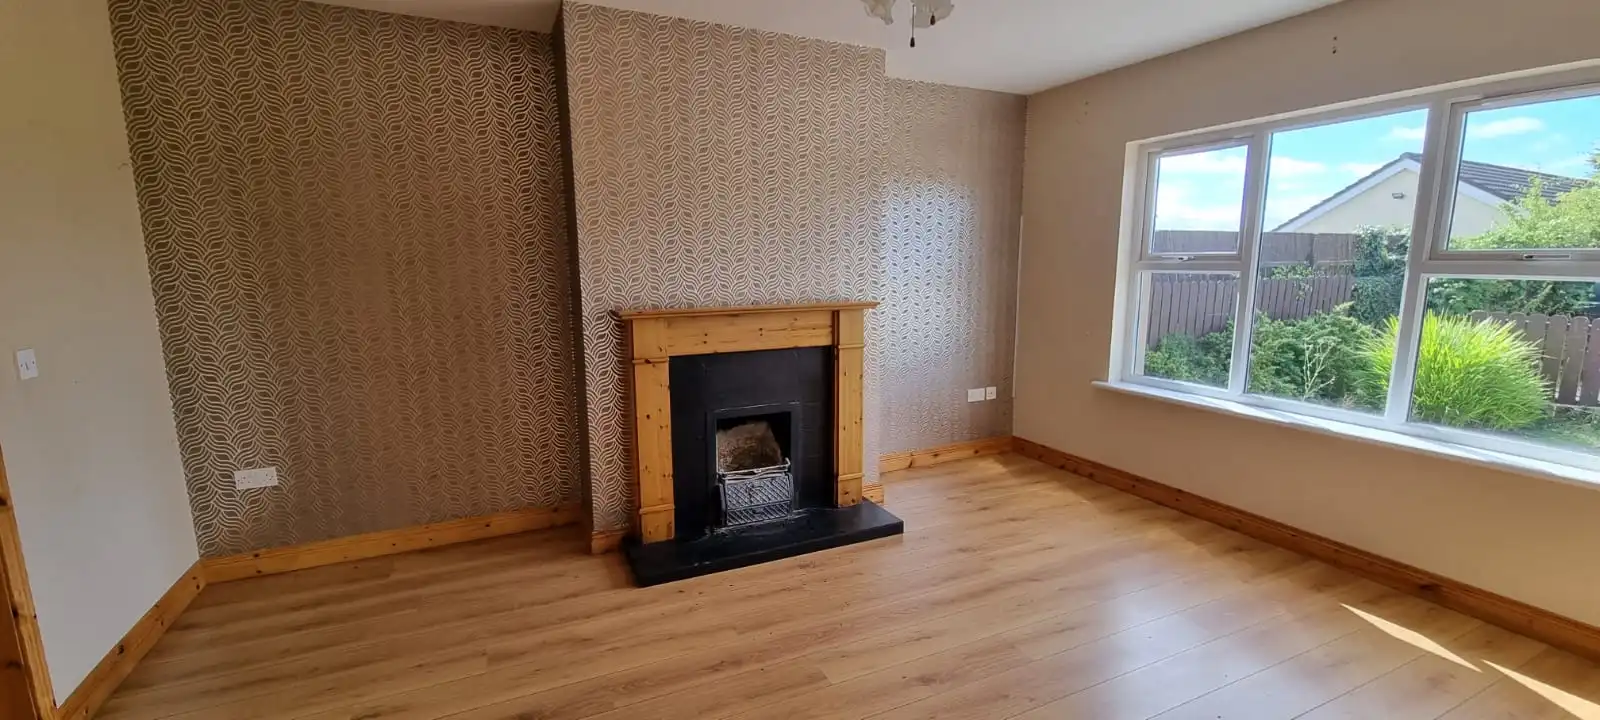 31 Camderry Road, Omagh, County Tyrone